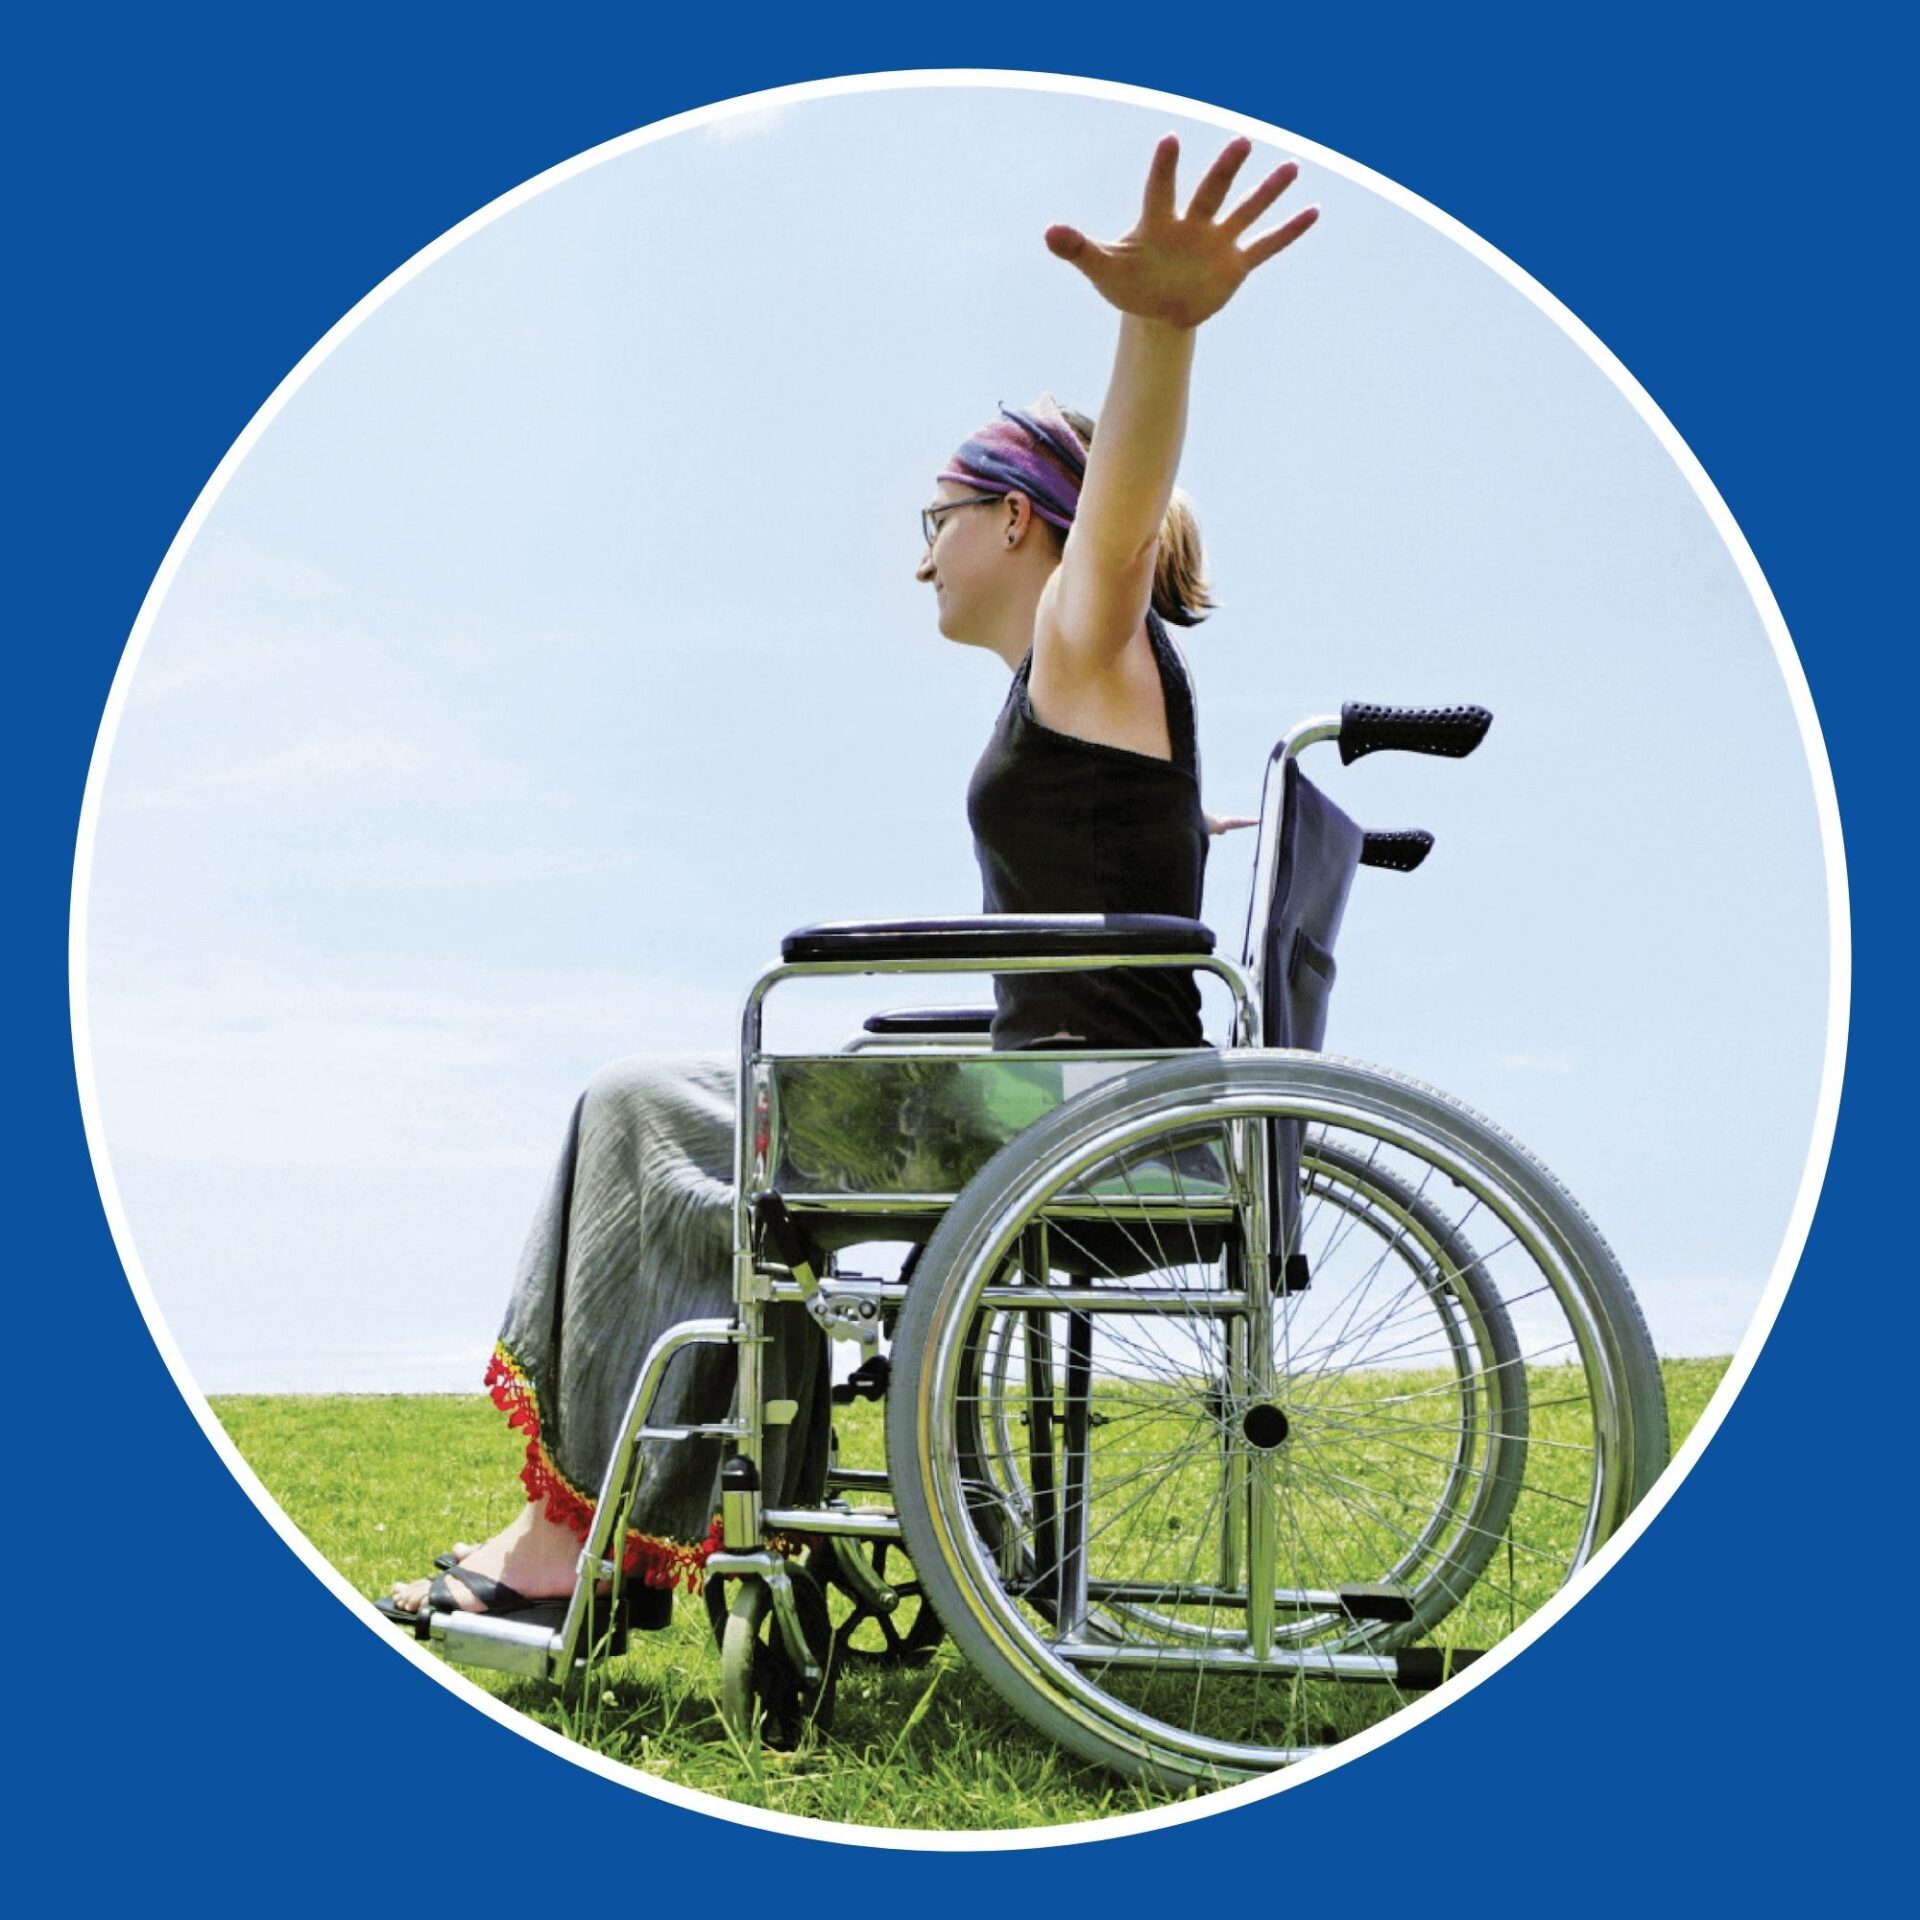 Image of a happy young lady with her arms in the air, in her wheelchair, on lush green grass